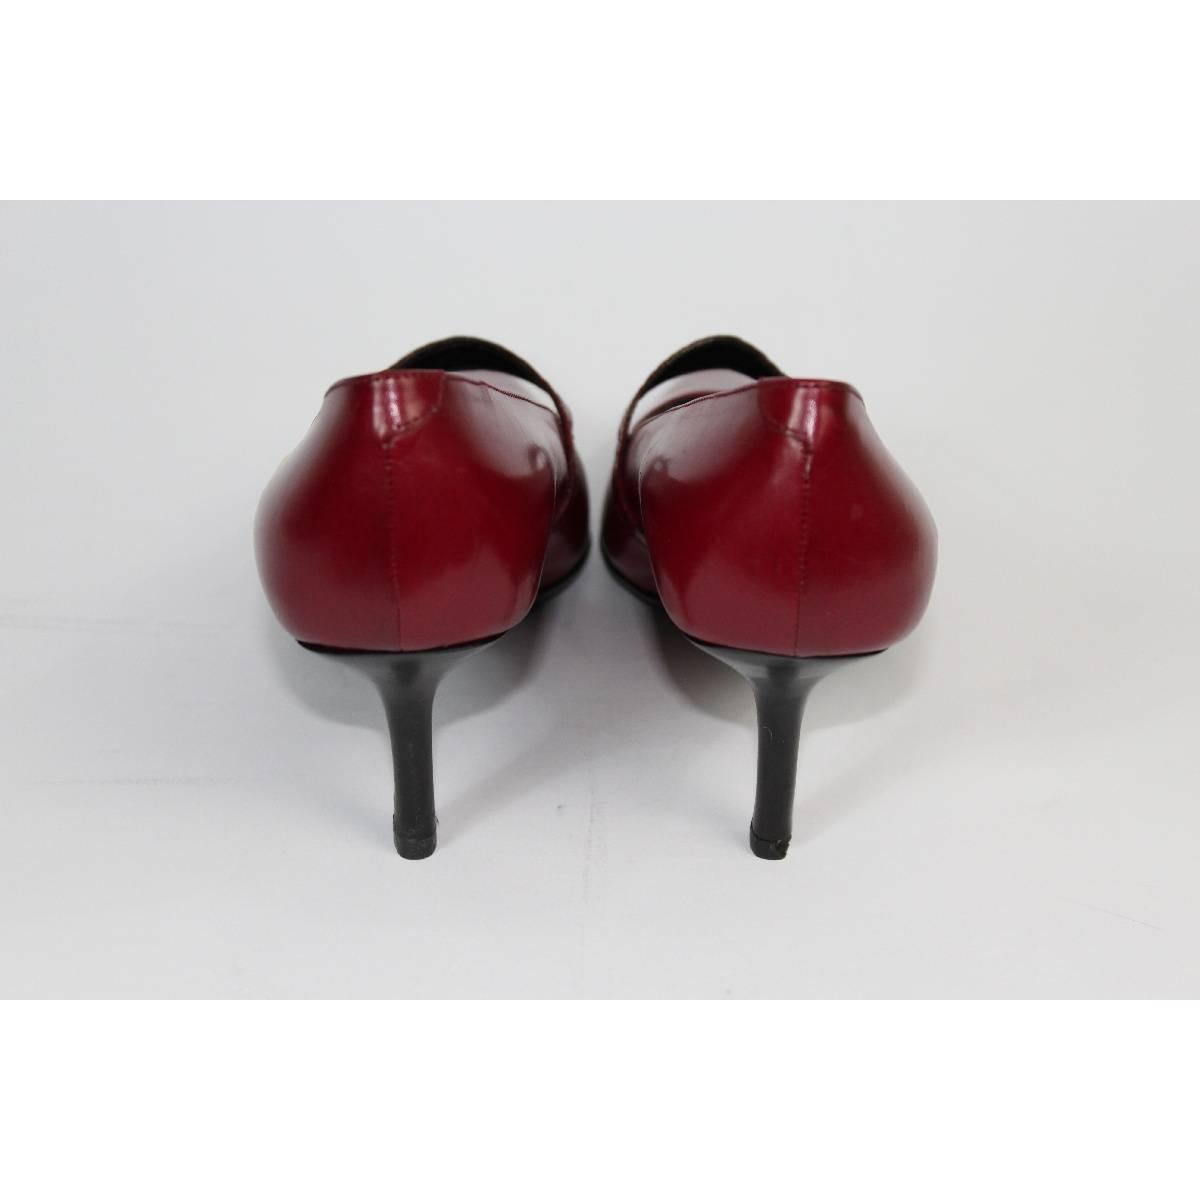 Women's 1980s Roberta Di Camerino Red Leather Hells Pumps Shoes For Sale